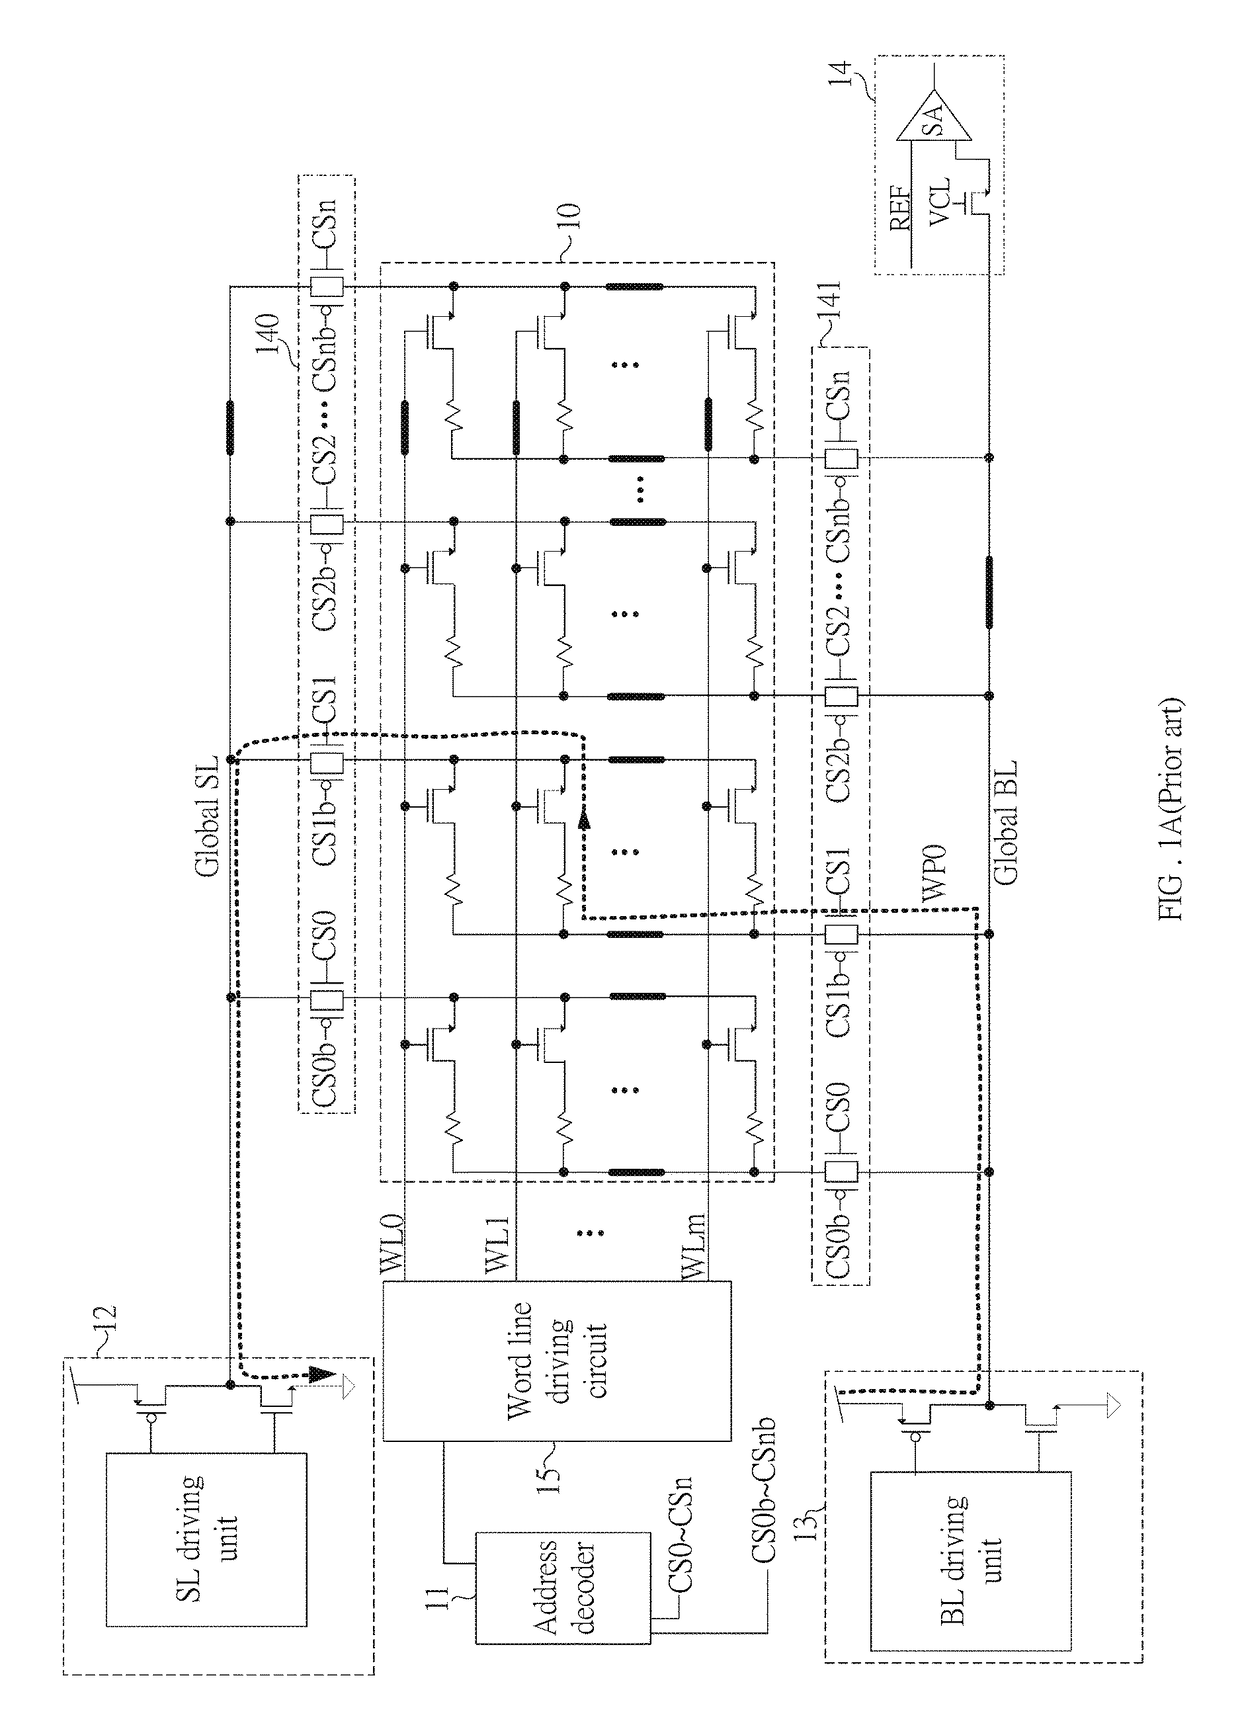 Read/write control device of resistive type memory